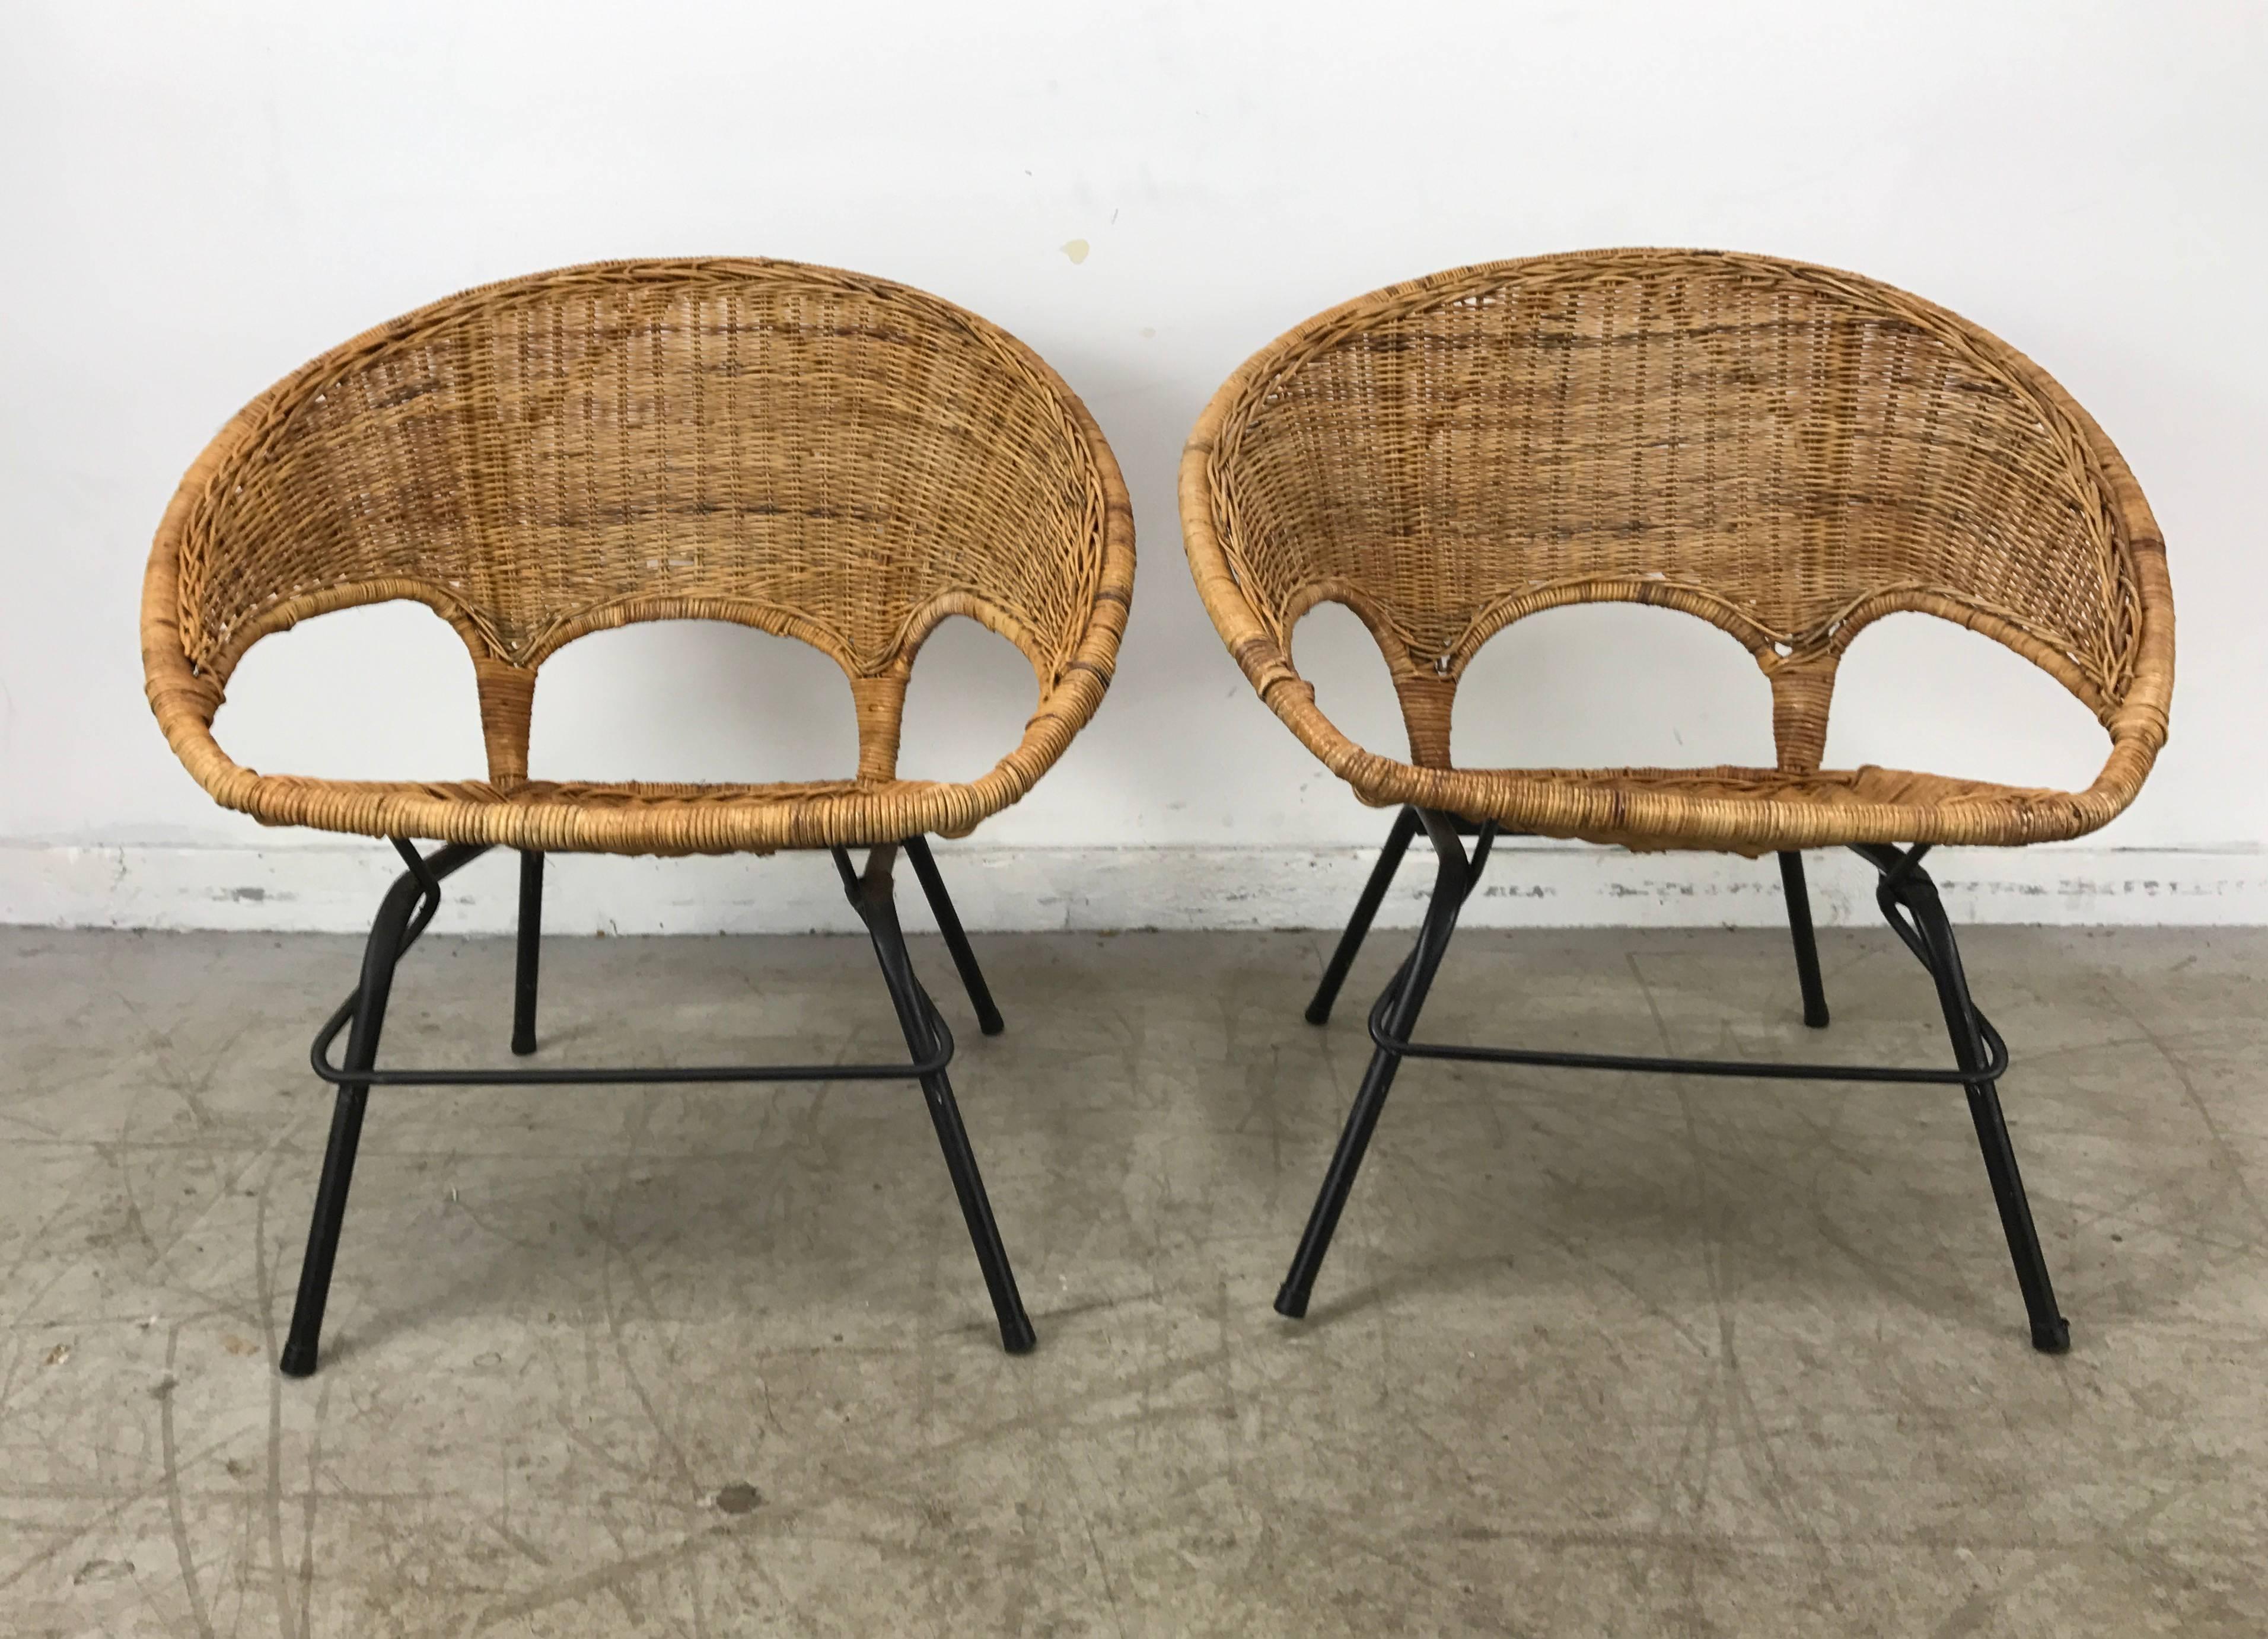 Classic Mid-Century Modern wicker and iron hoop chairs by Franco Albini. Unusual triple cathedral back design, Indoor or outdoor.